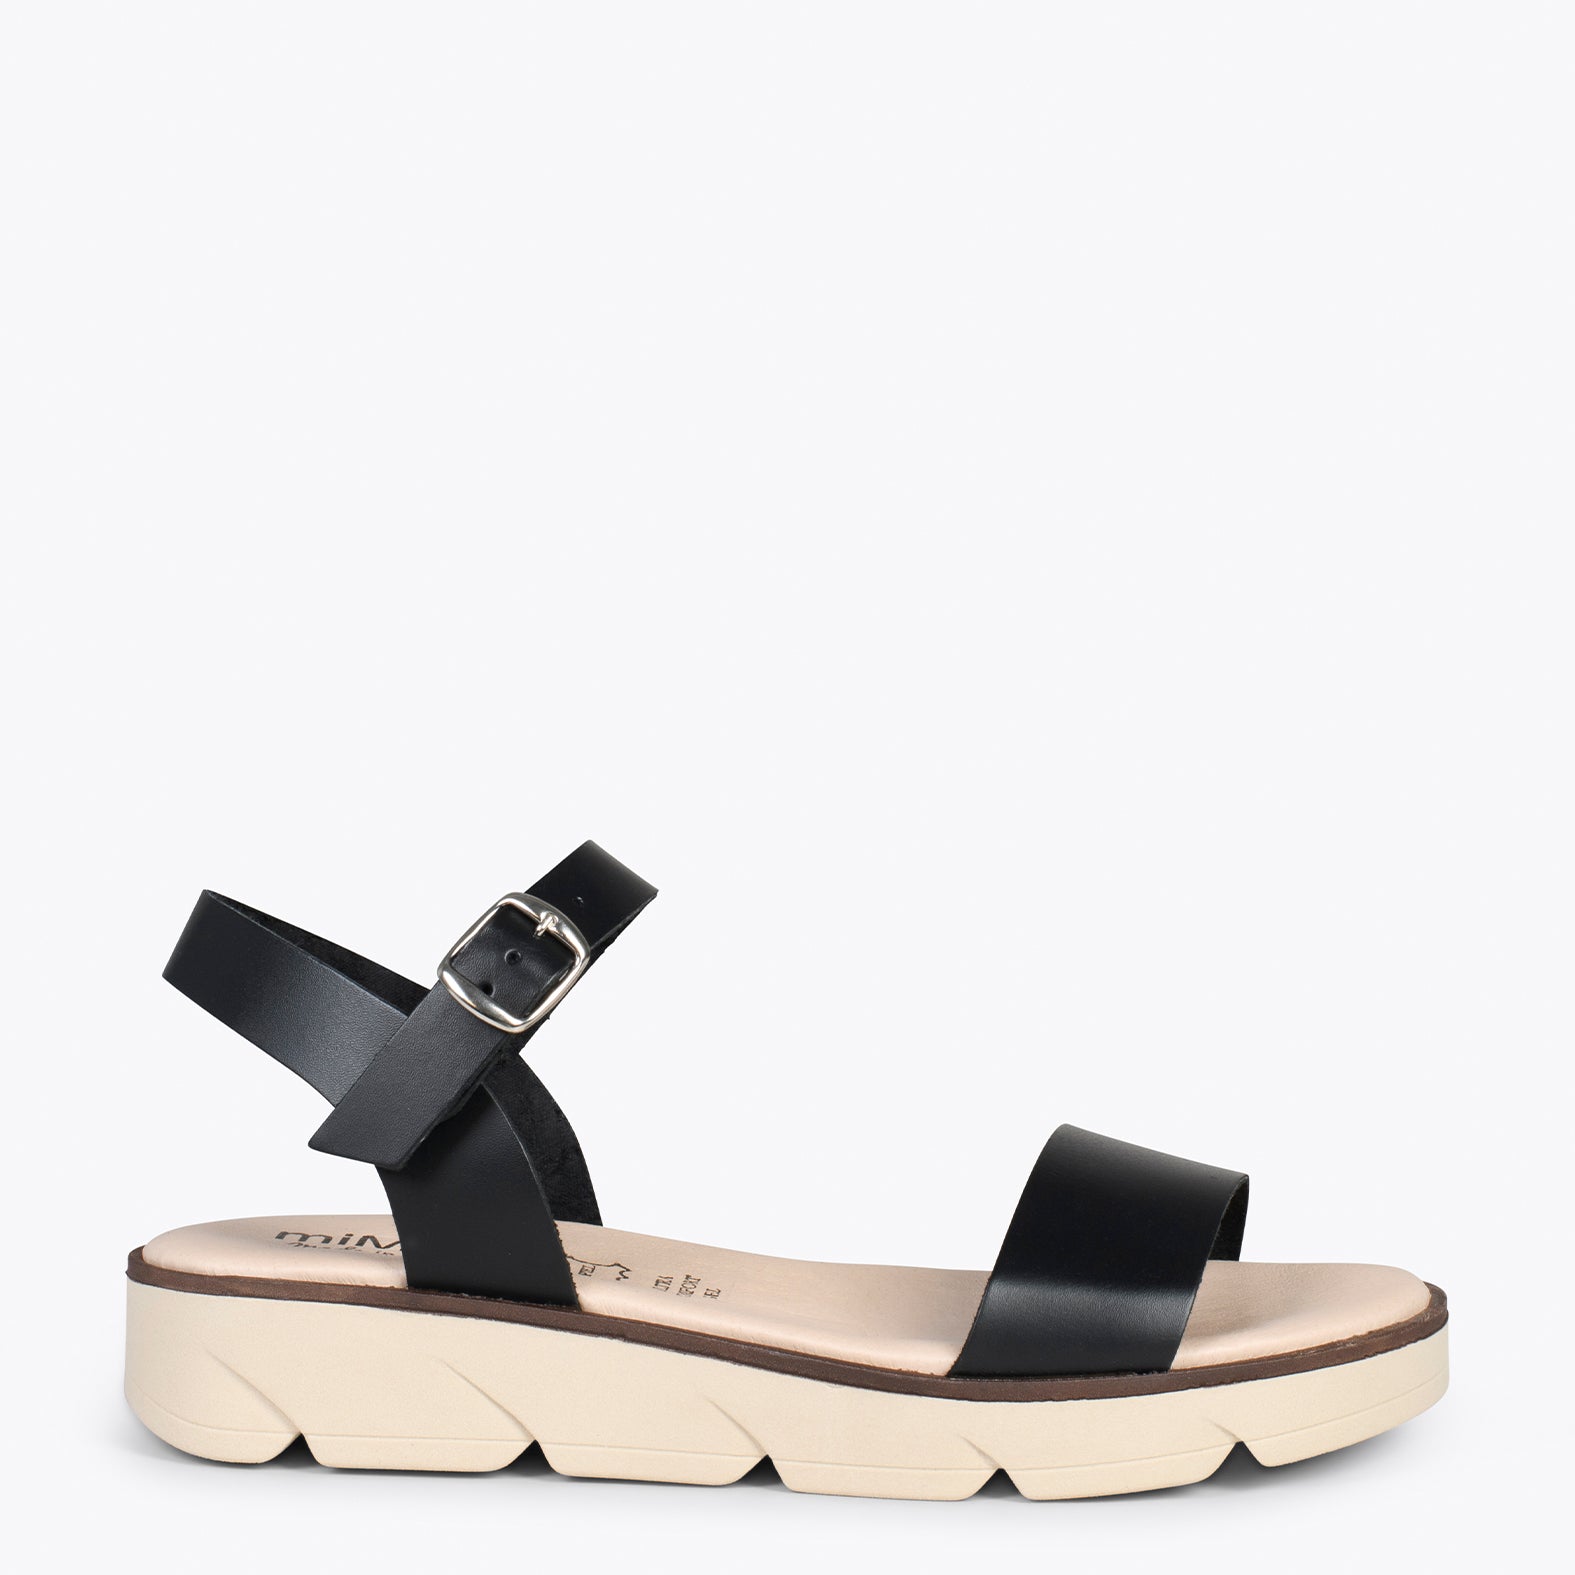 RIVER – BLACK leather flat sandals with wedge